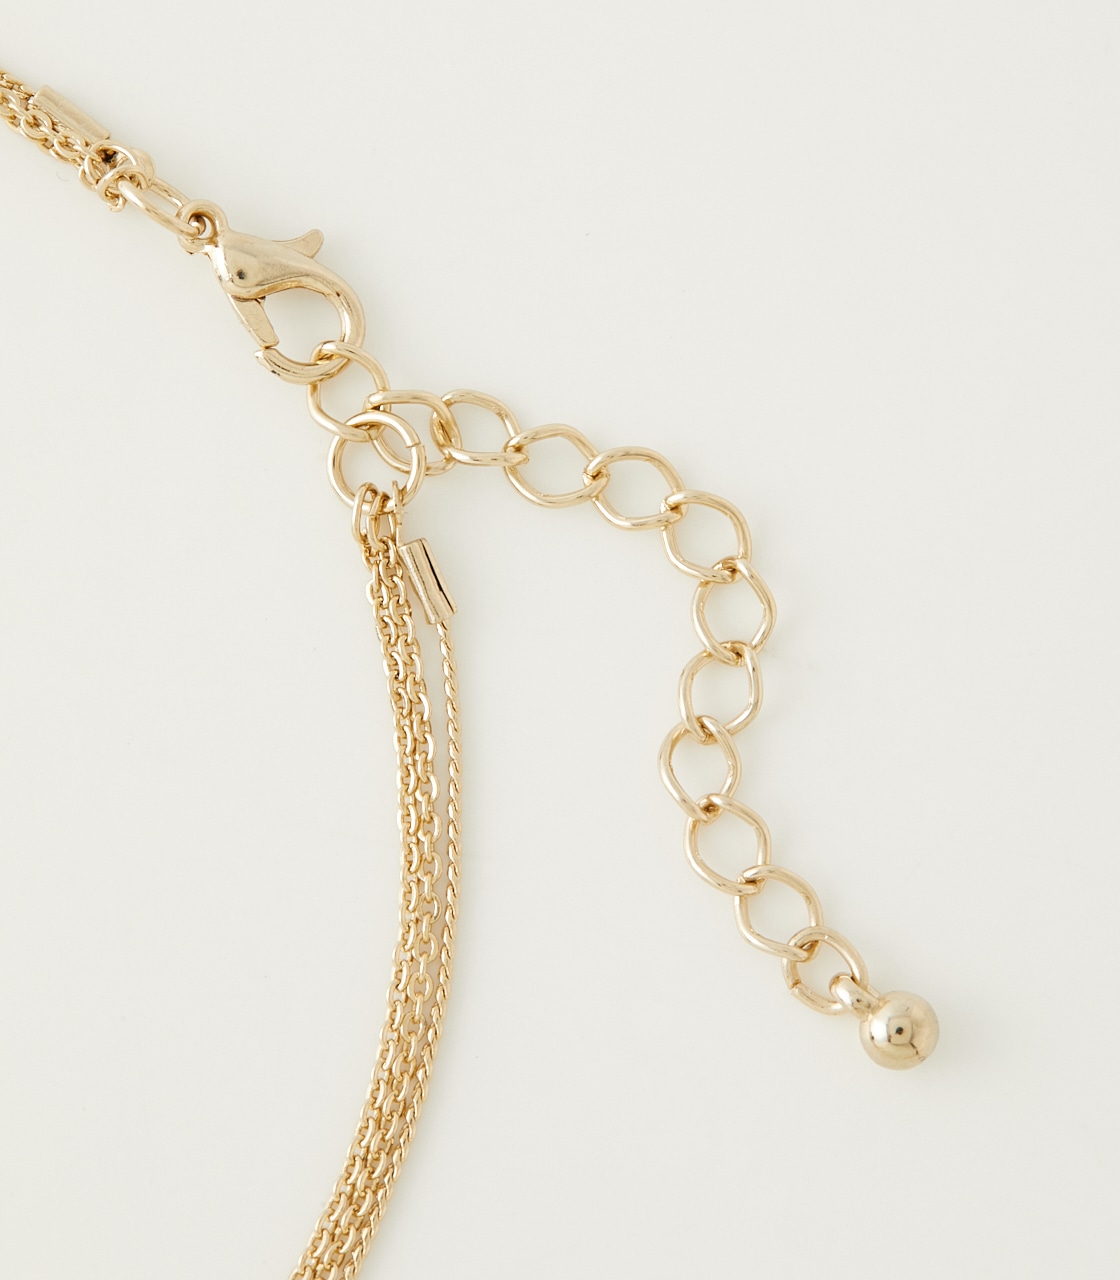 COIN THREE-STRAND NECKLACE/コインスリーストランドネックレス【MOOK54掲載 90359】 詳細画像 L/GLD 6